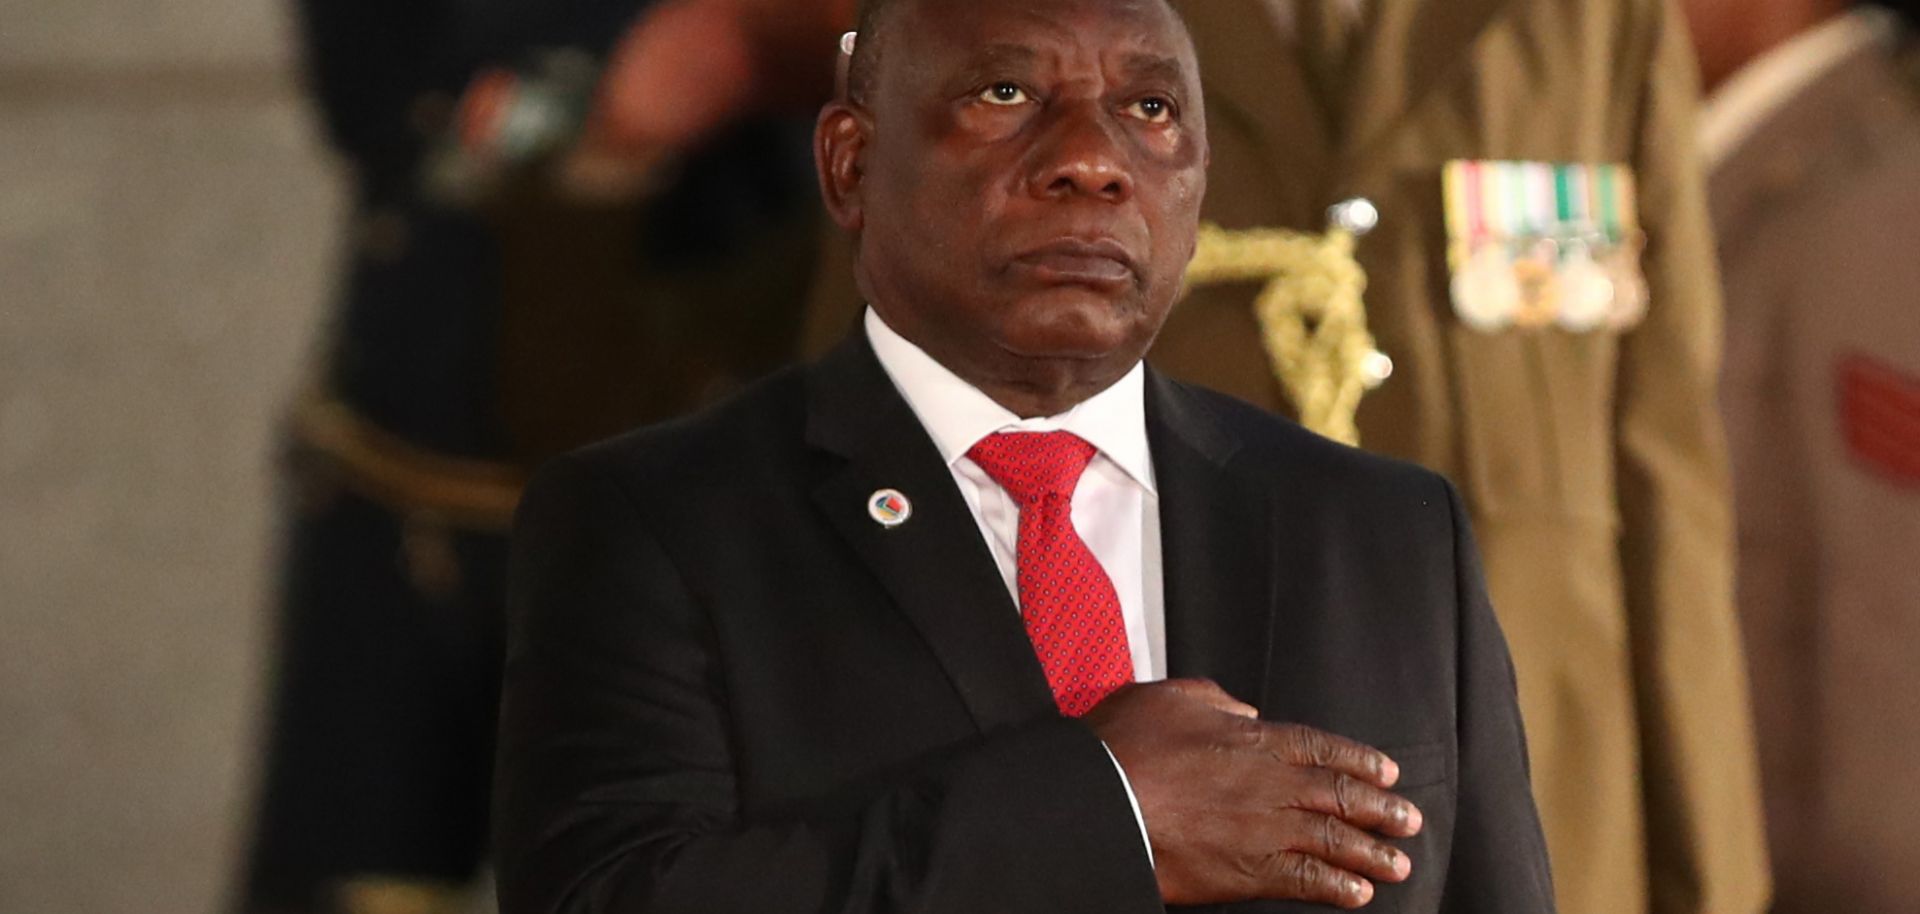 South African President Cyril Ramaphosa stands during the national anthem before delivering his annual State of the Nation address to parliament in Cape Town on June 20, 2019.